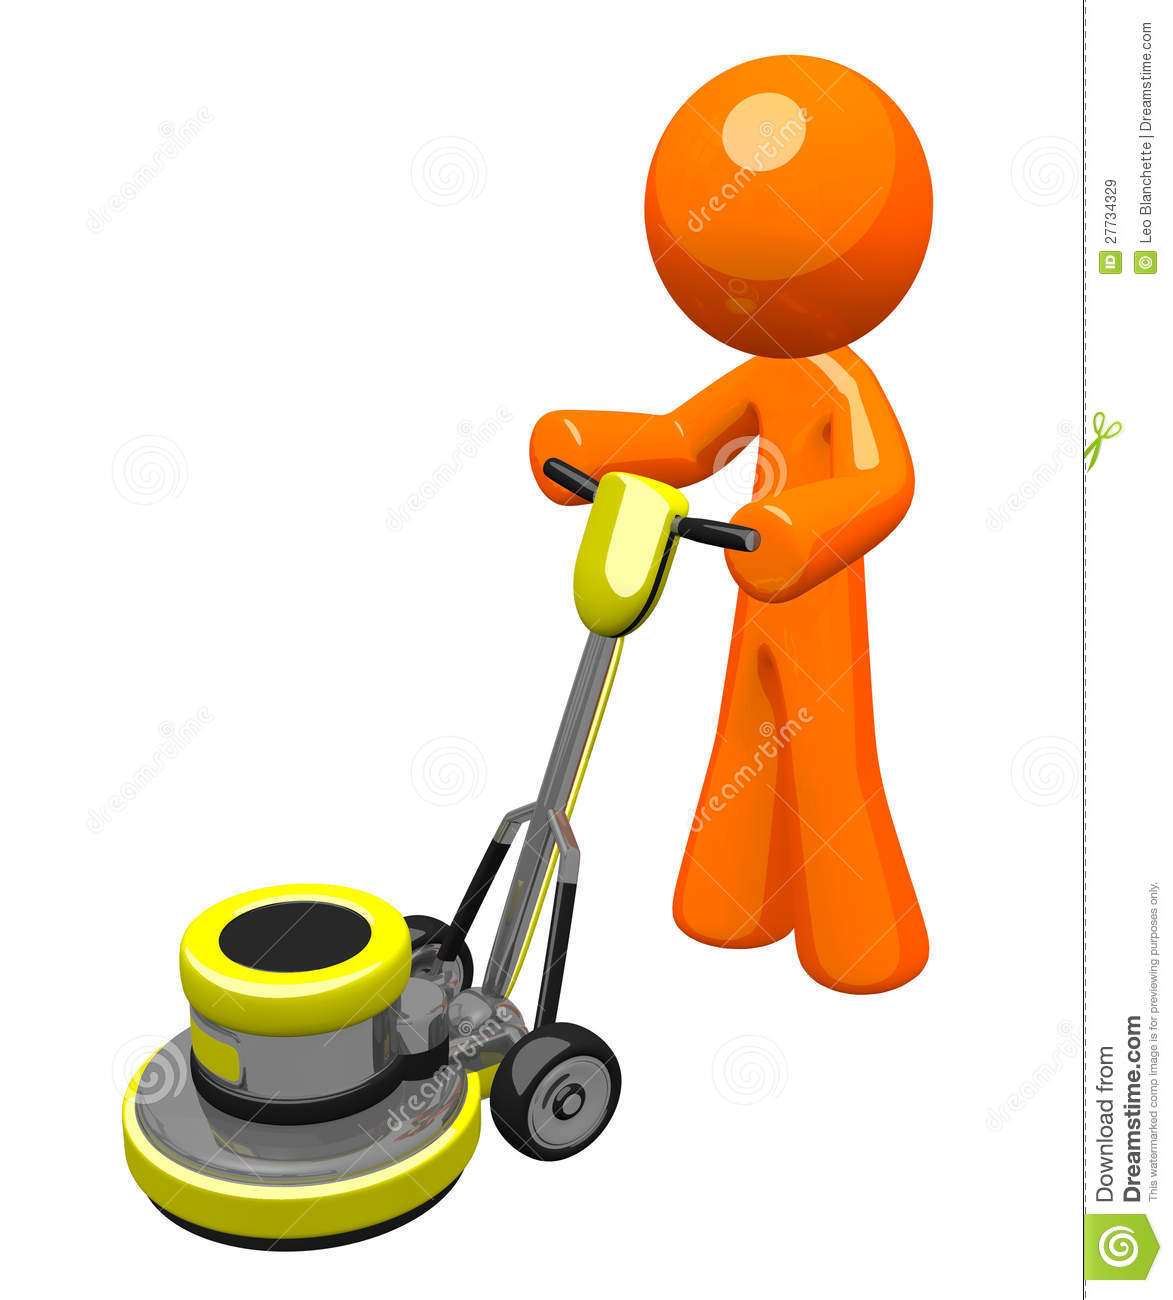 3d Orange Man With Floor Buffer Royalty Free Stock Images   Image